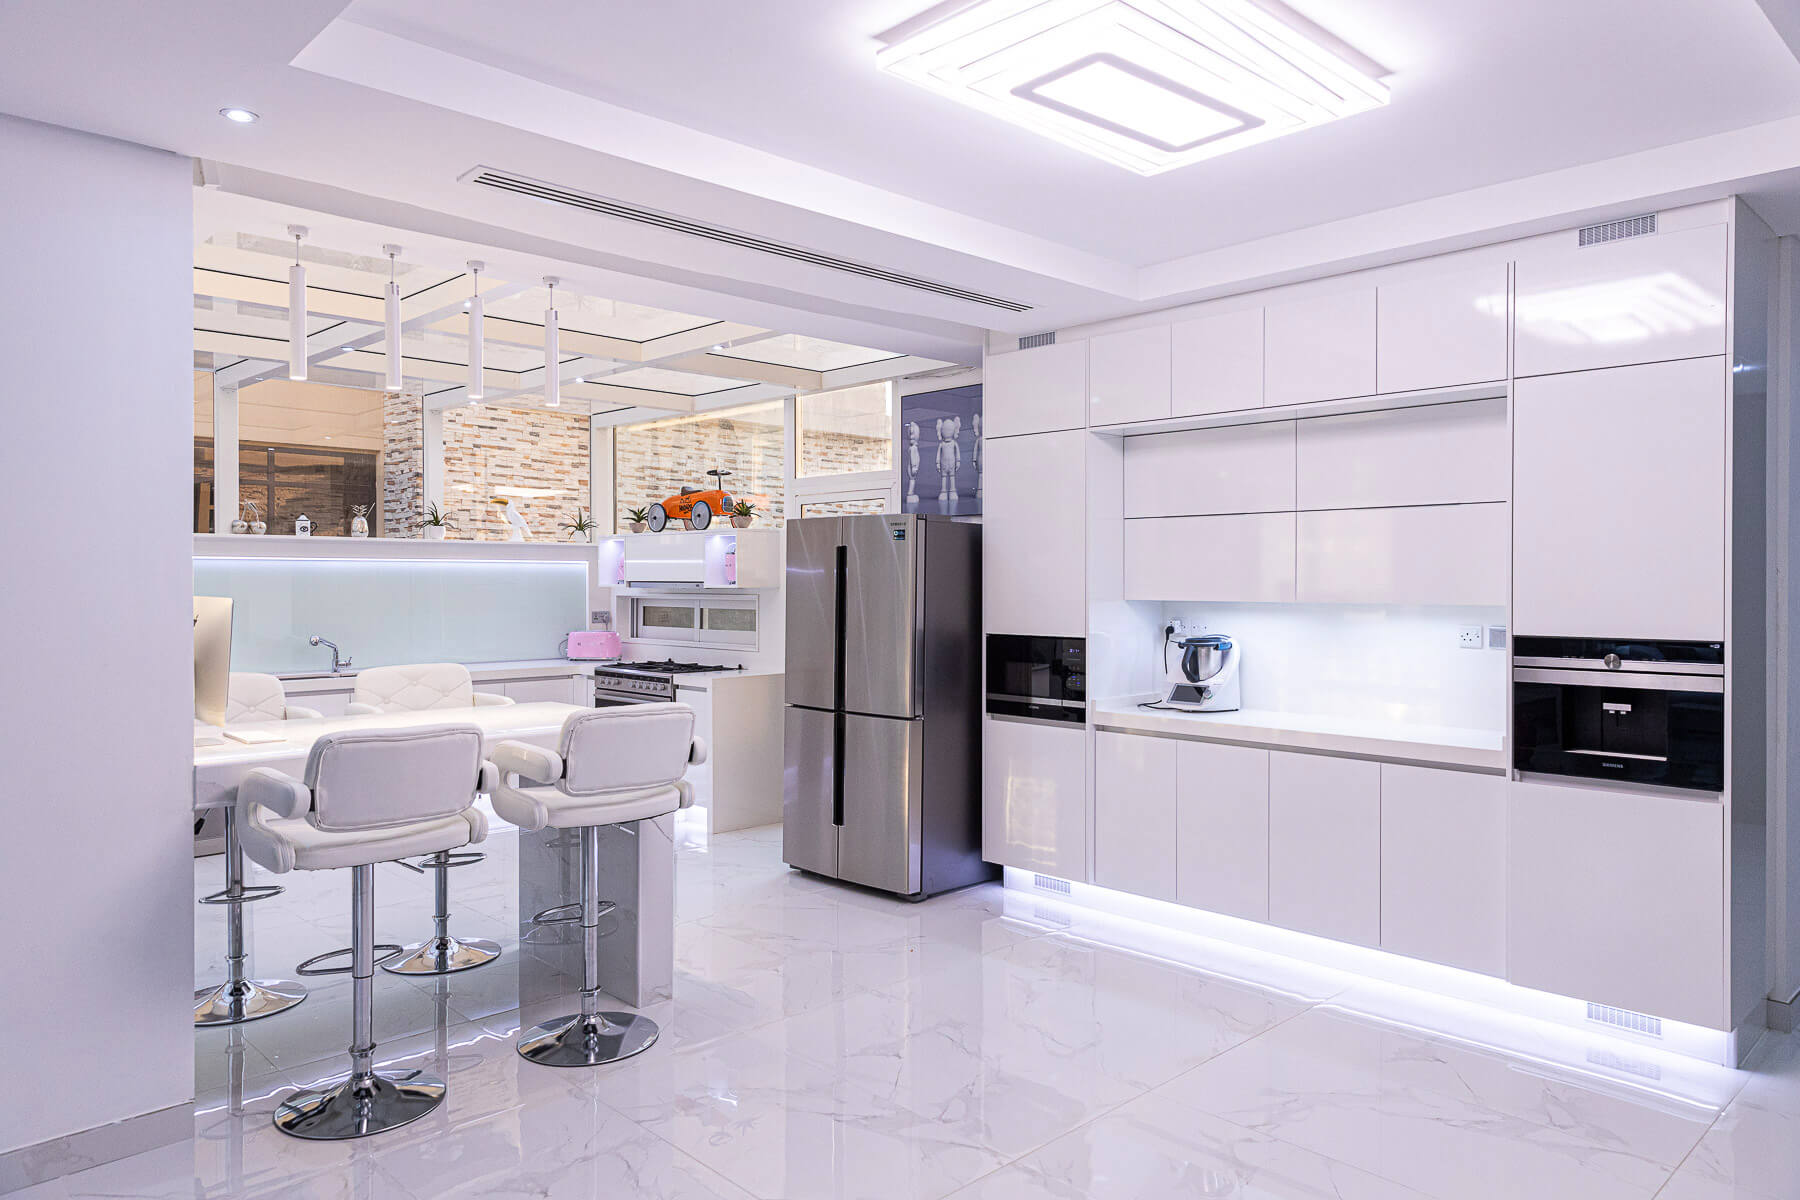 12 Key Components and Characteristics of Luxury Kitchens in Dubai